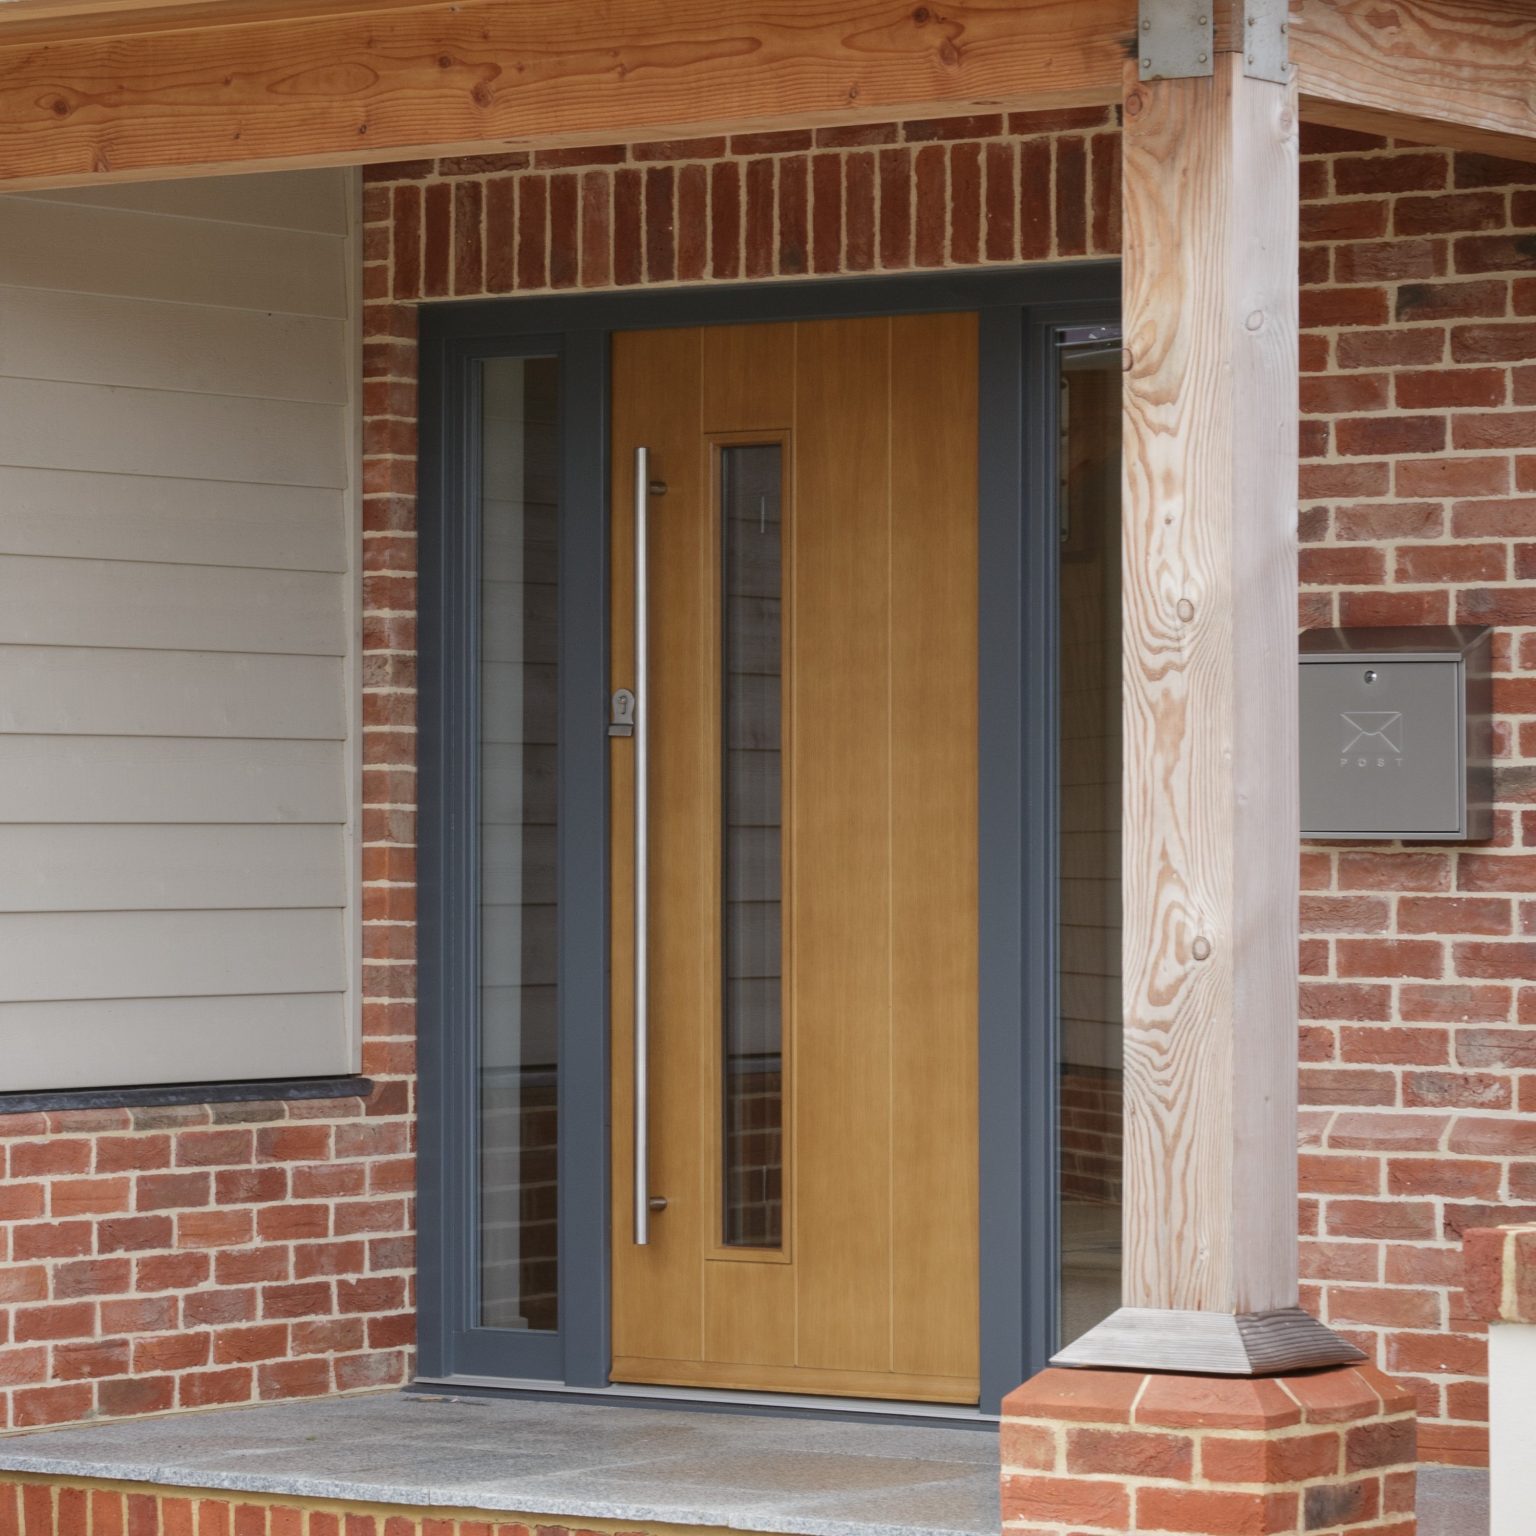 timber front doors in a modern style